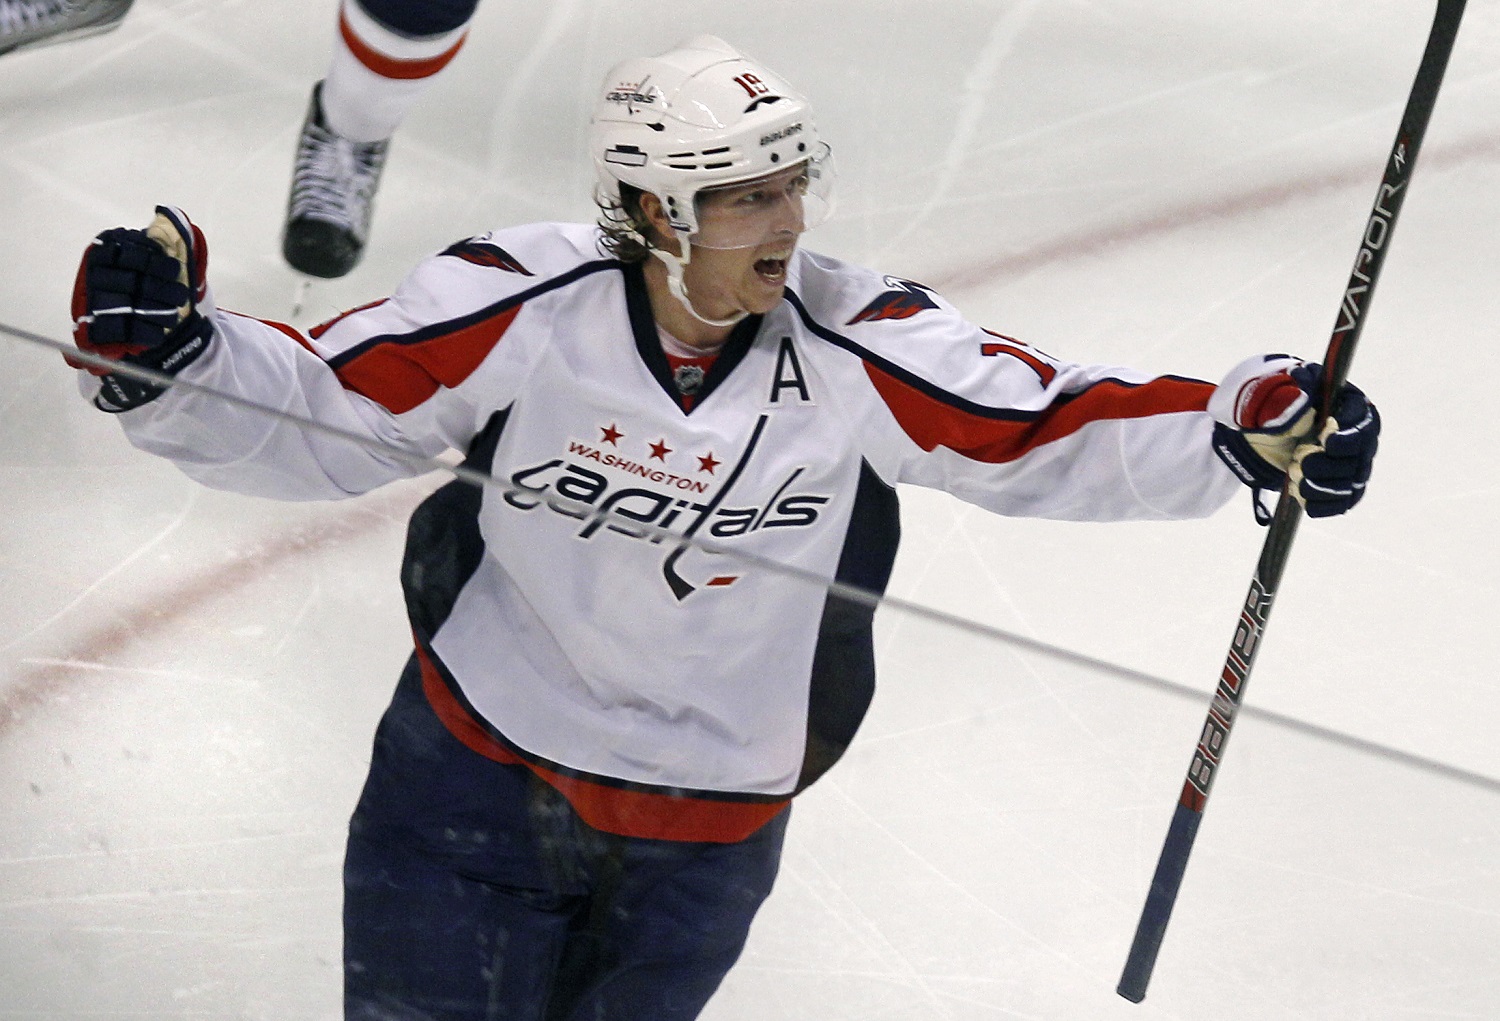 Washington Capitals center Nicklas Backstrom (19) celebrates his game-winning goal against the Boston Bruins during the second overtime period of Game 2 of an NHL hockey Stanley Cup first-round playoff series in Boston, Saturday, April 14, 2012.  The Capitals won 2-1, tying the series at 1-1. (AP Photo/Charles Krupa)